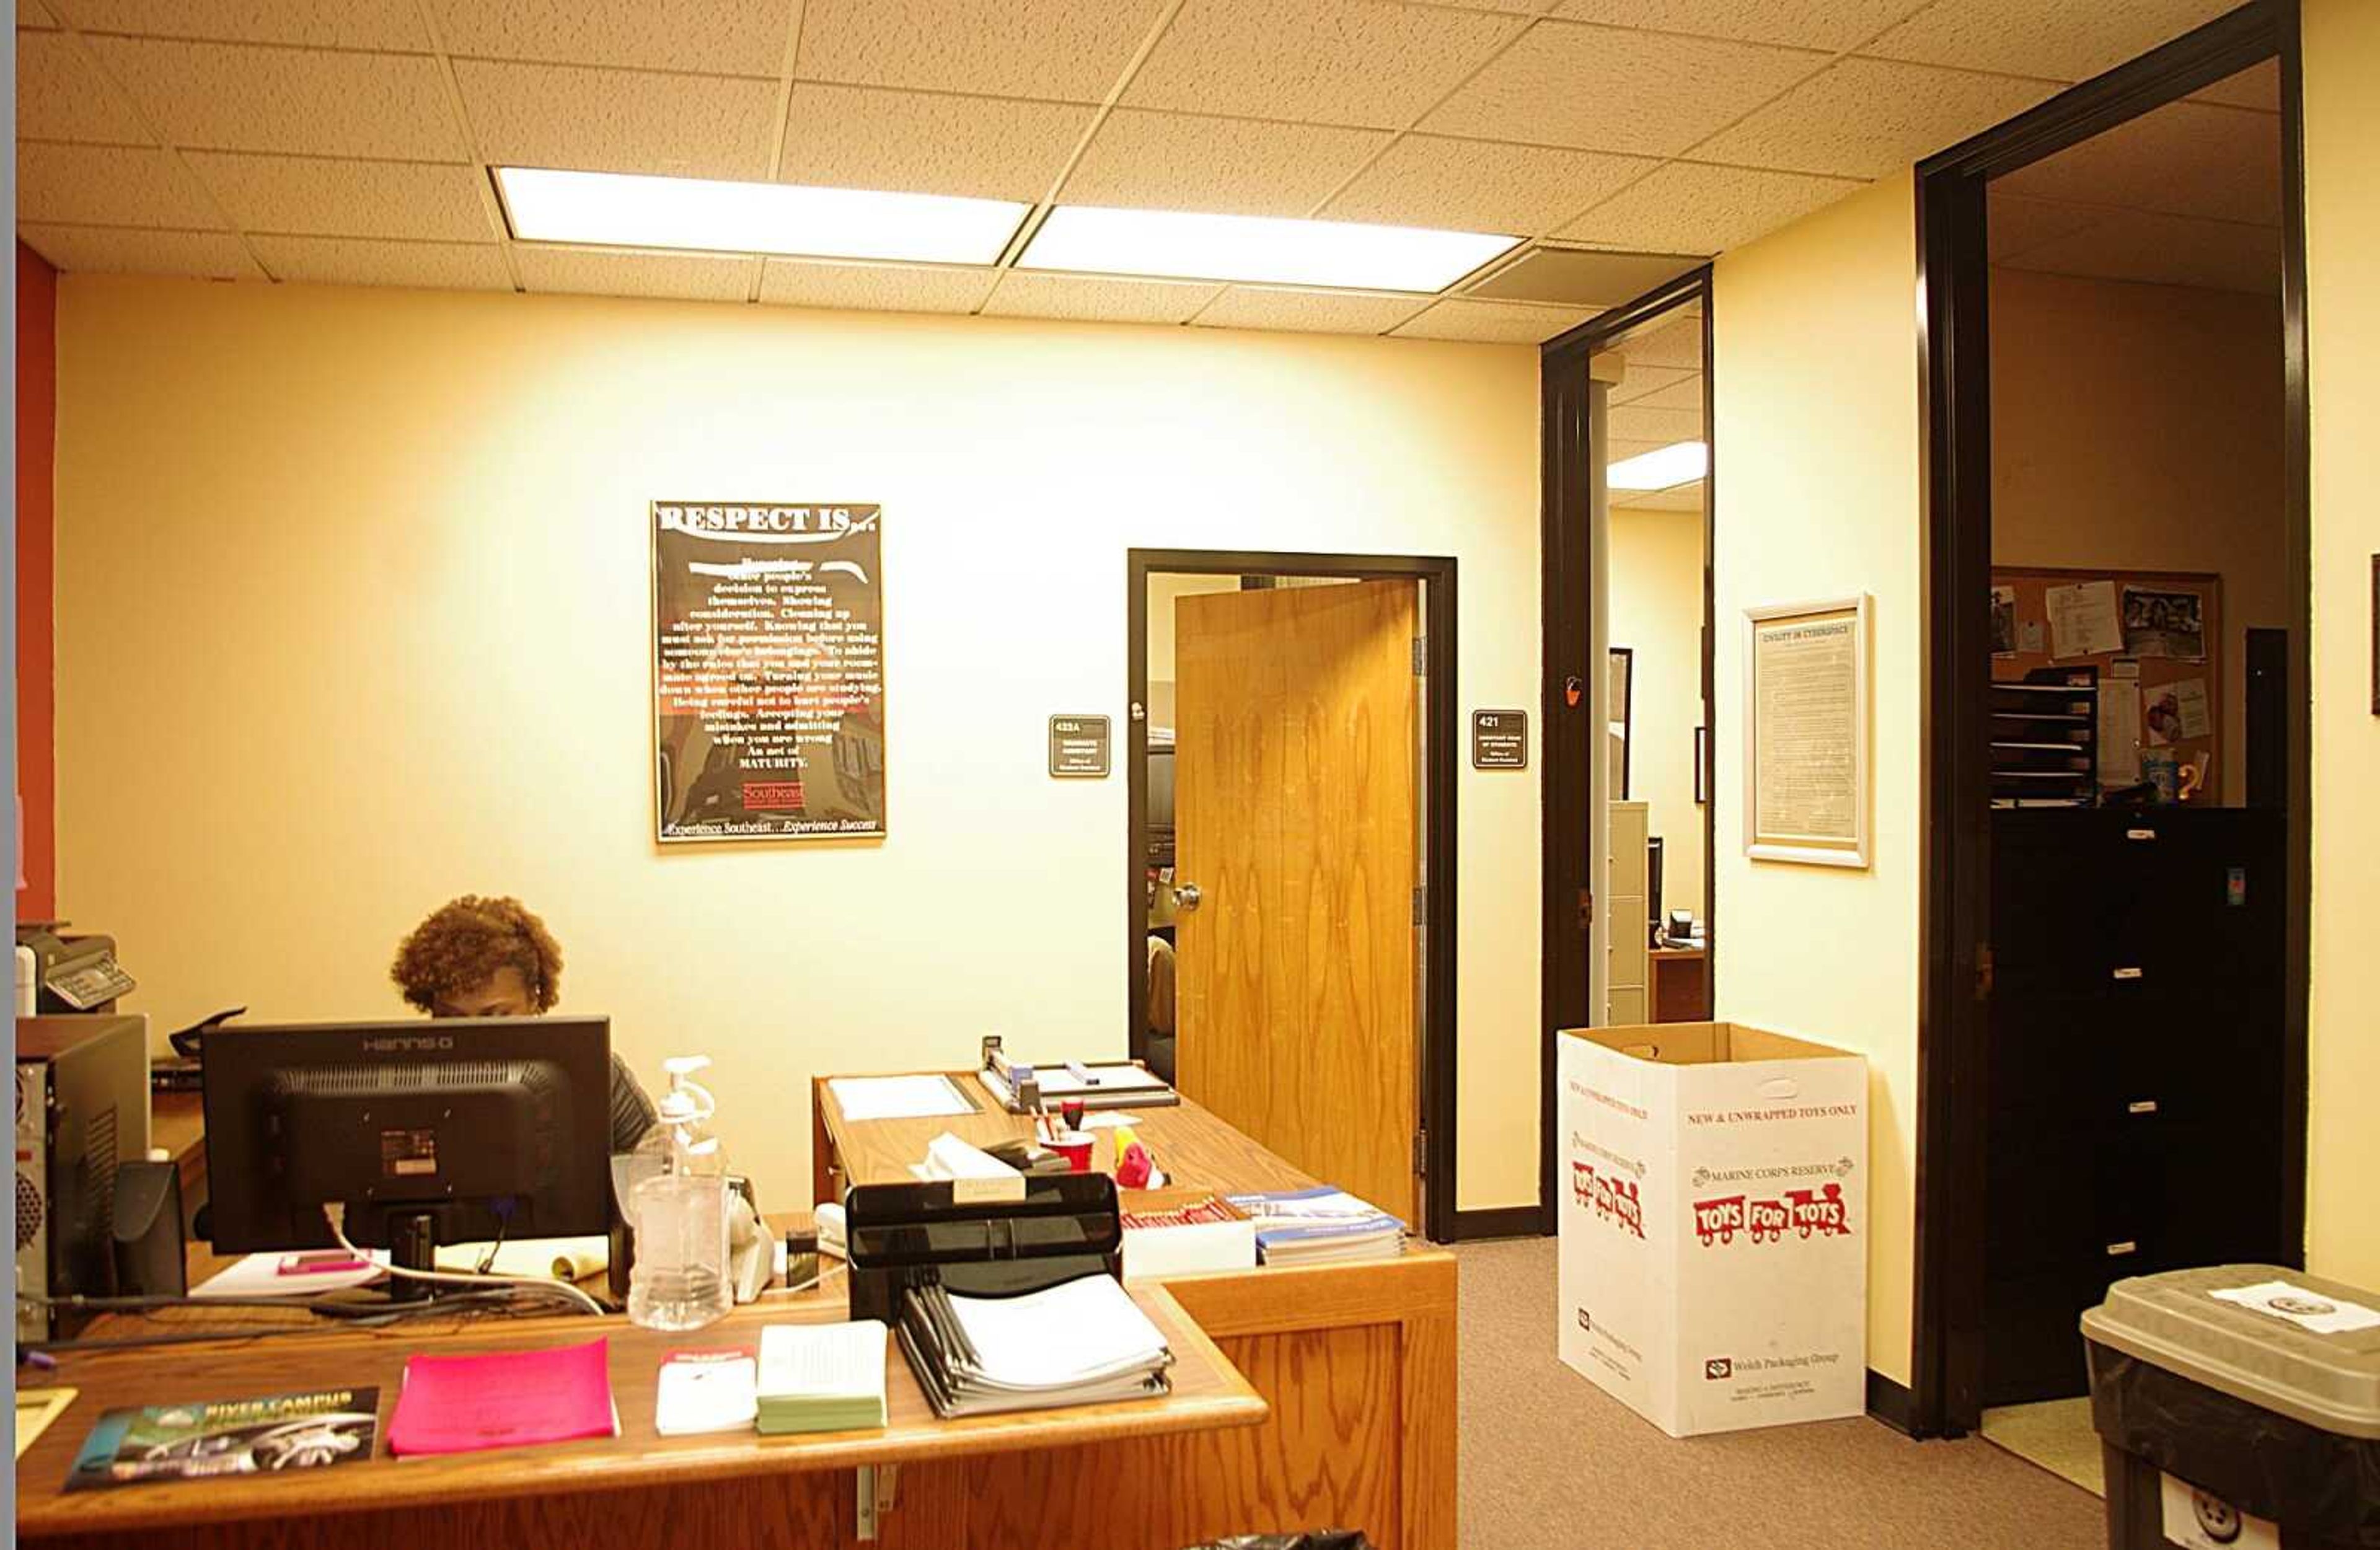 The Office of Student Conduct is located on the fourth floor of the University Center. Photo by Nathan Hamilton